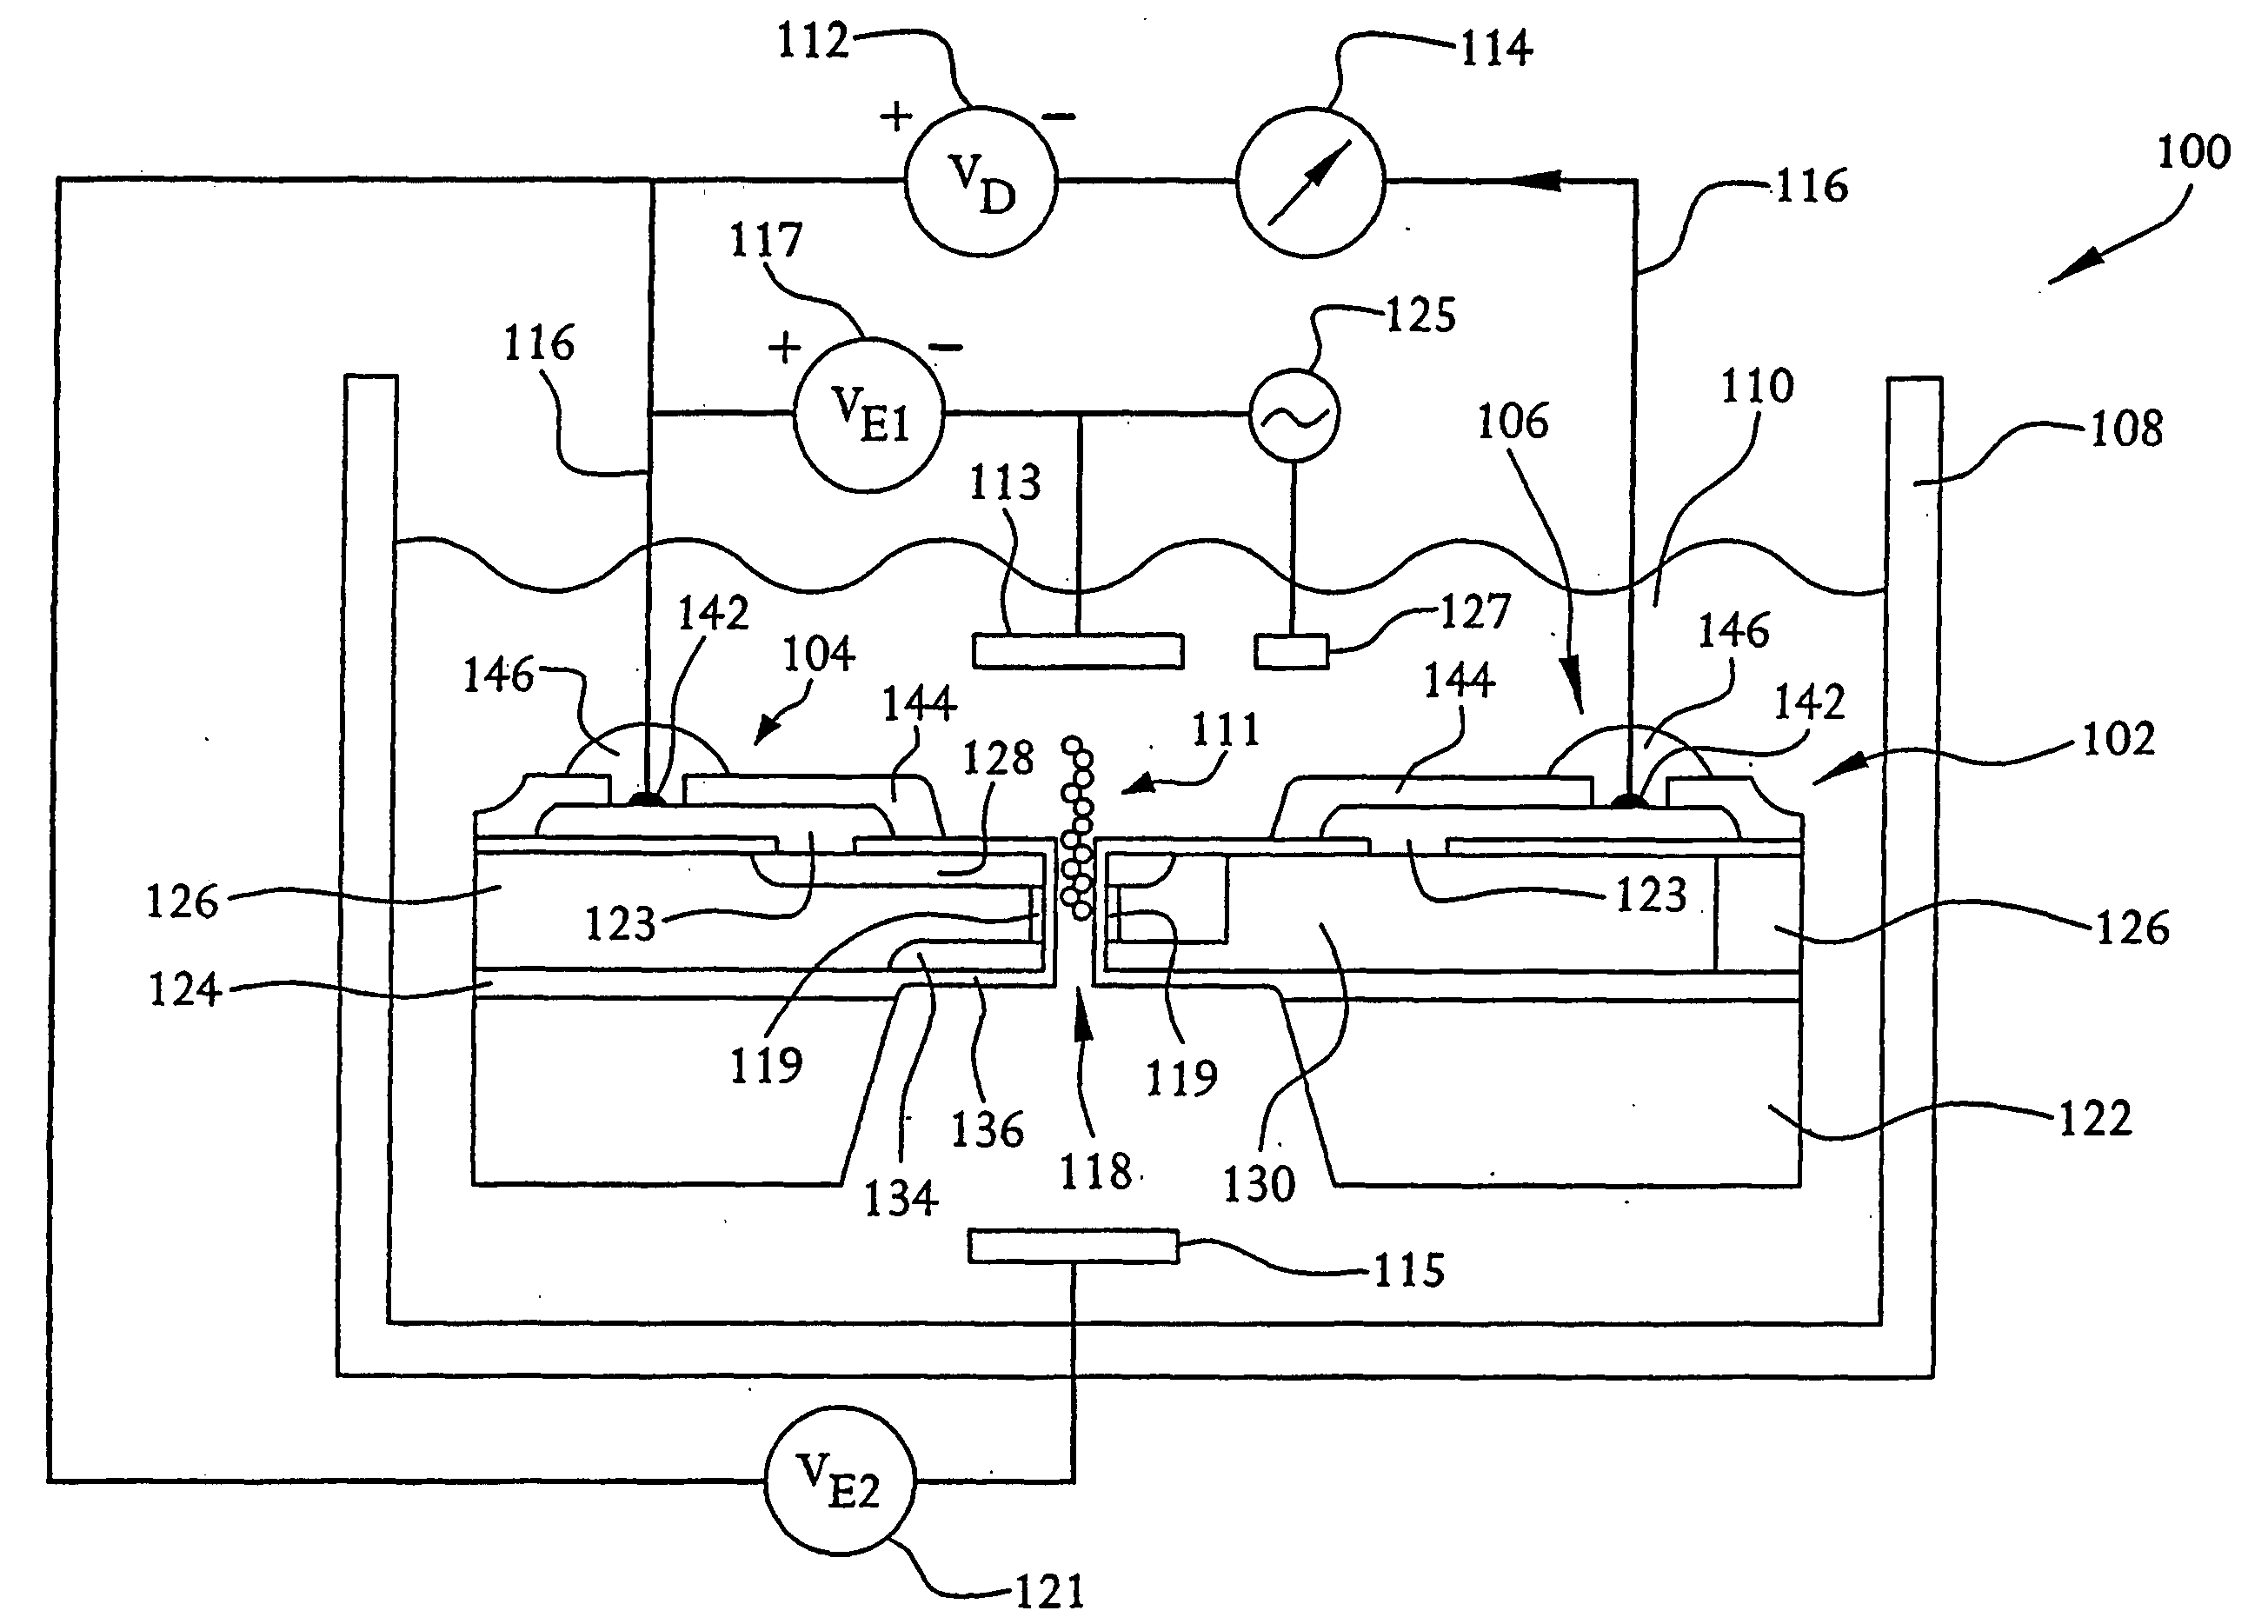 Ultra-fast nucleic acid sequencing device and a method for making and using the same